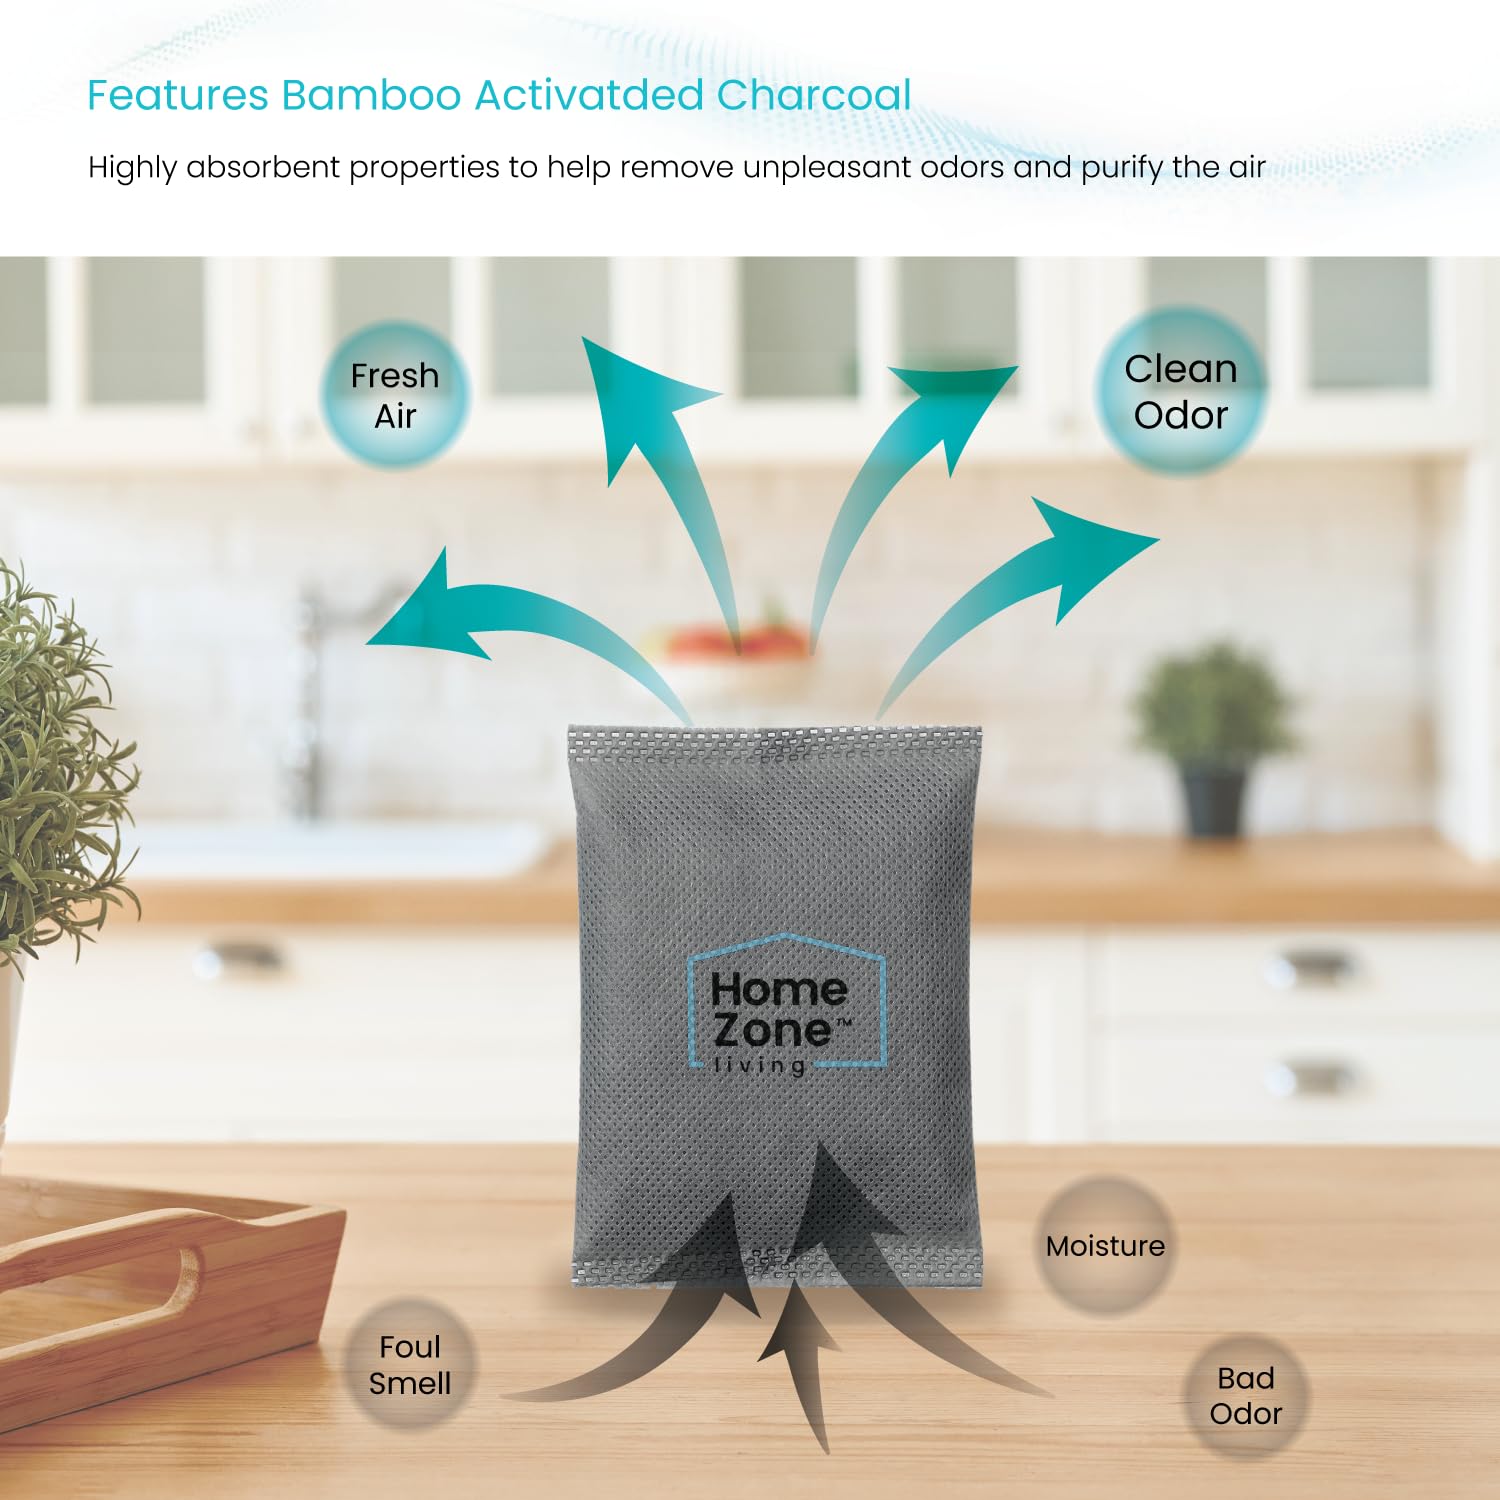 Home Zone Living CleanAura Deodorizing Filter Kit with Charcoal Filter Bag and Magnetic Sticker, Helps Eliminate Odor at Home